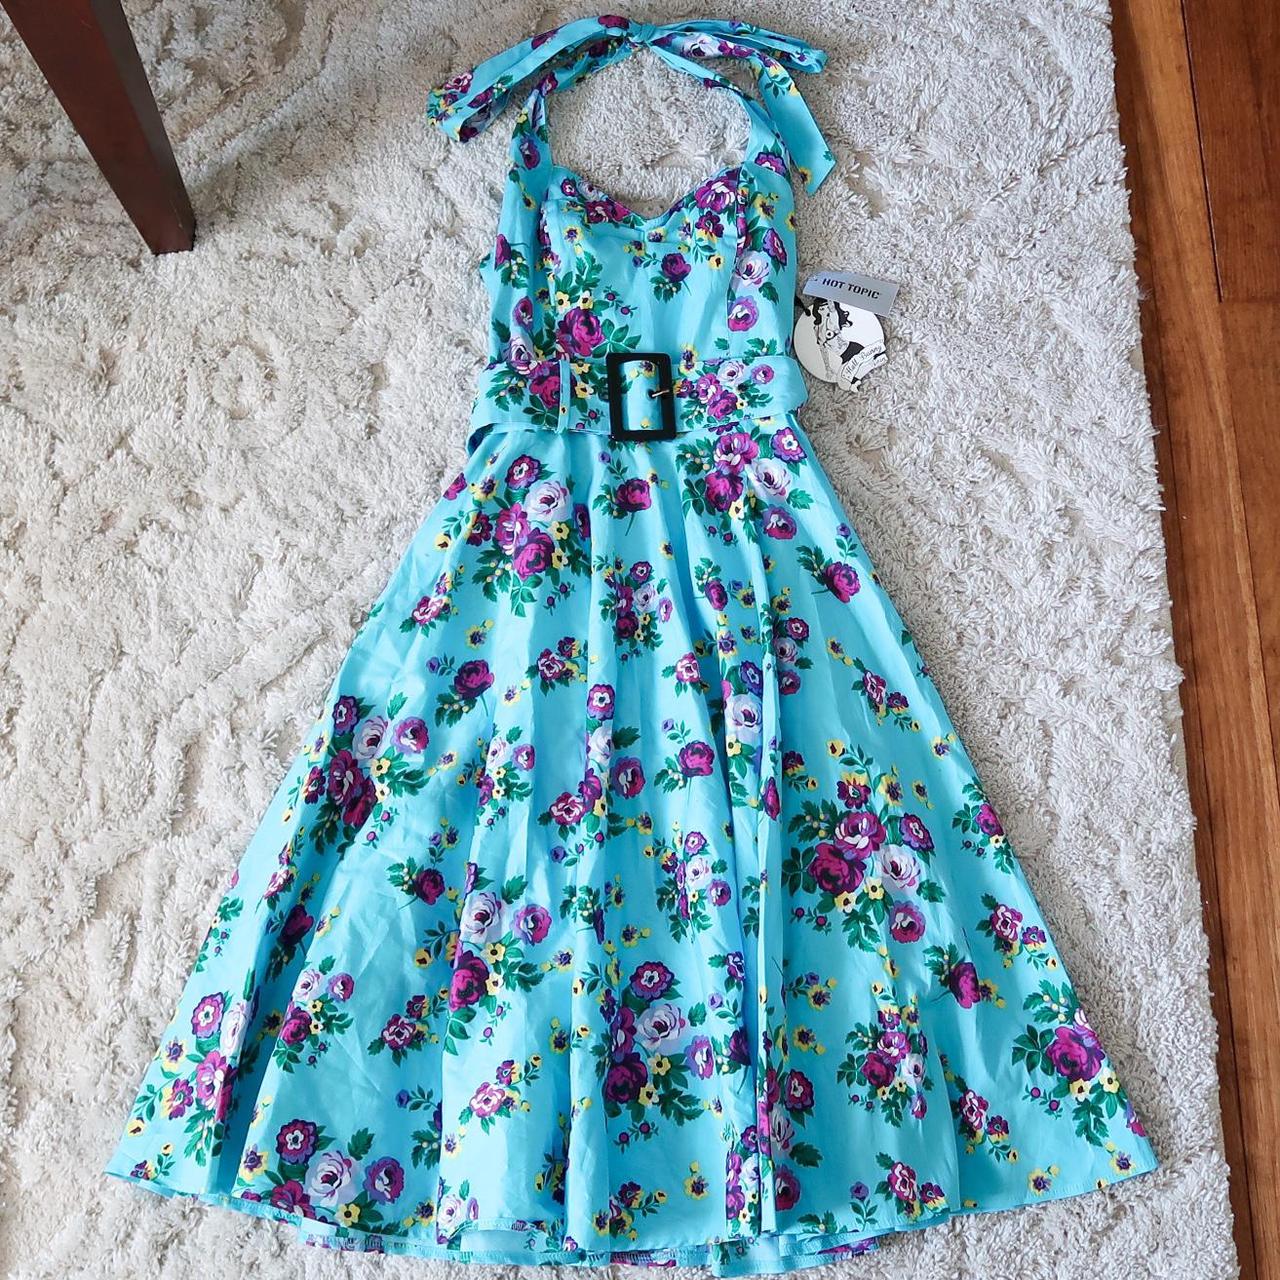 Retro 50s/60s style size extra small (XS) turquoise... - Depop